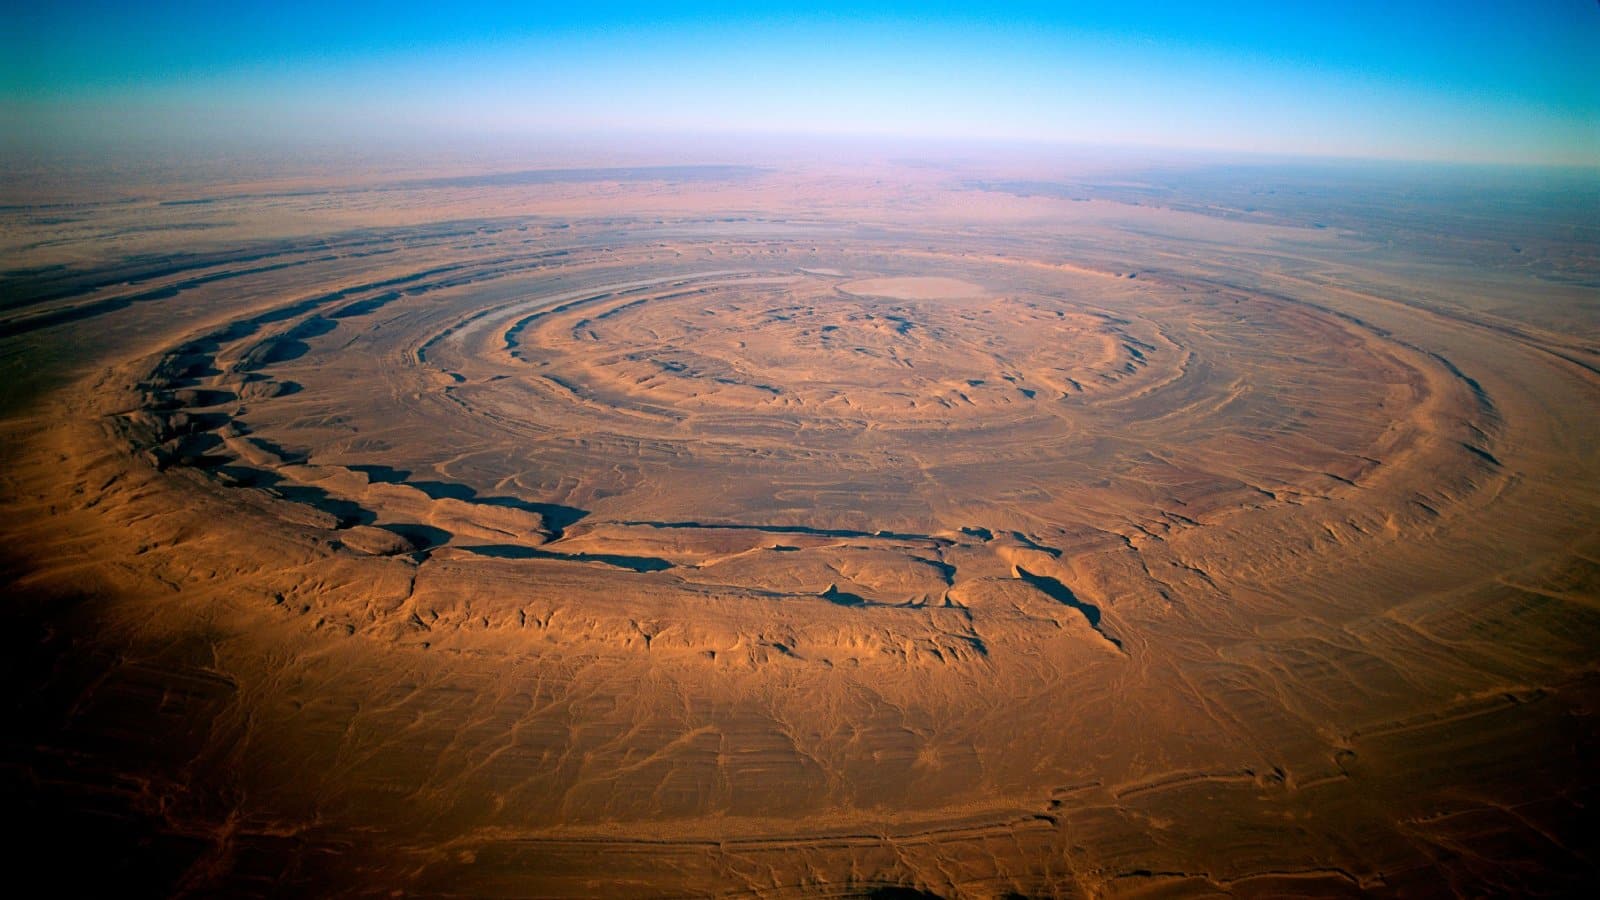 <p class="wp-caption-text">Image Credit: Shutterstock / Som Thapa Magar</p>  <p><span>The Richat Structure, also known as the Eye of the Sahara, is a prominent circular feature in the Sahara Desert that has fascinated Atlantis seekers. Visible from space, this geological formation was once thought to be a crater but is now understood to be the result of erosion. Its circular pattern and size have led some to speculate that it could be the remains of Atlantis, described by Plato as being concentric rings of land and water.</span></p>